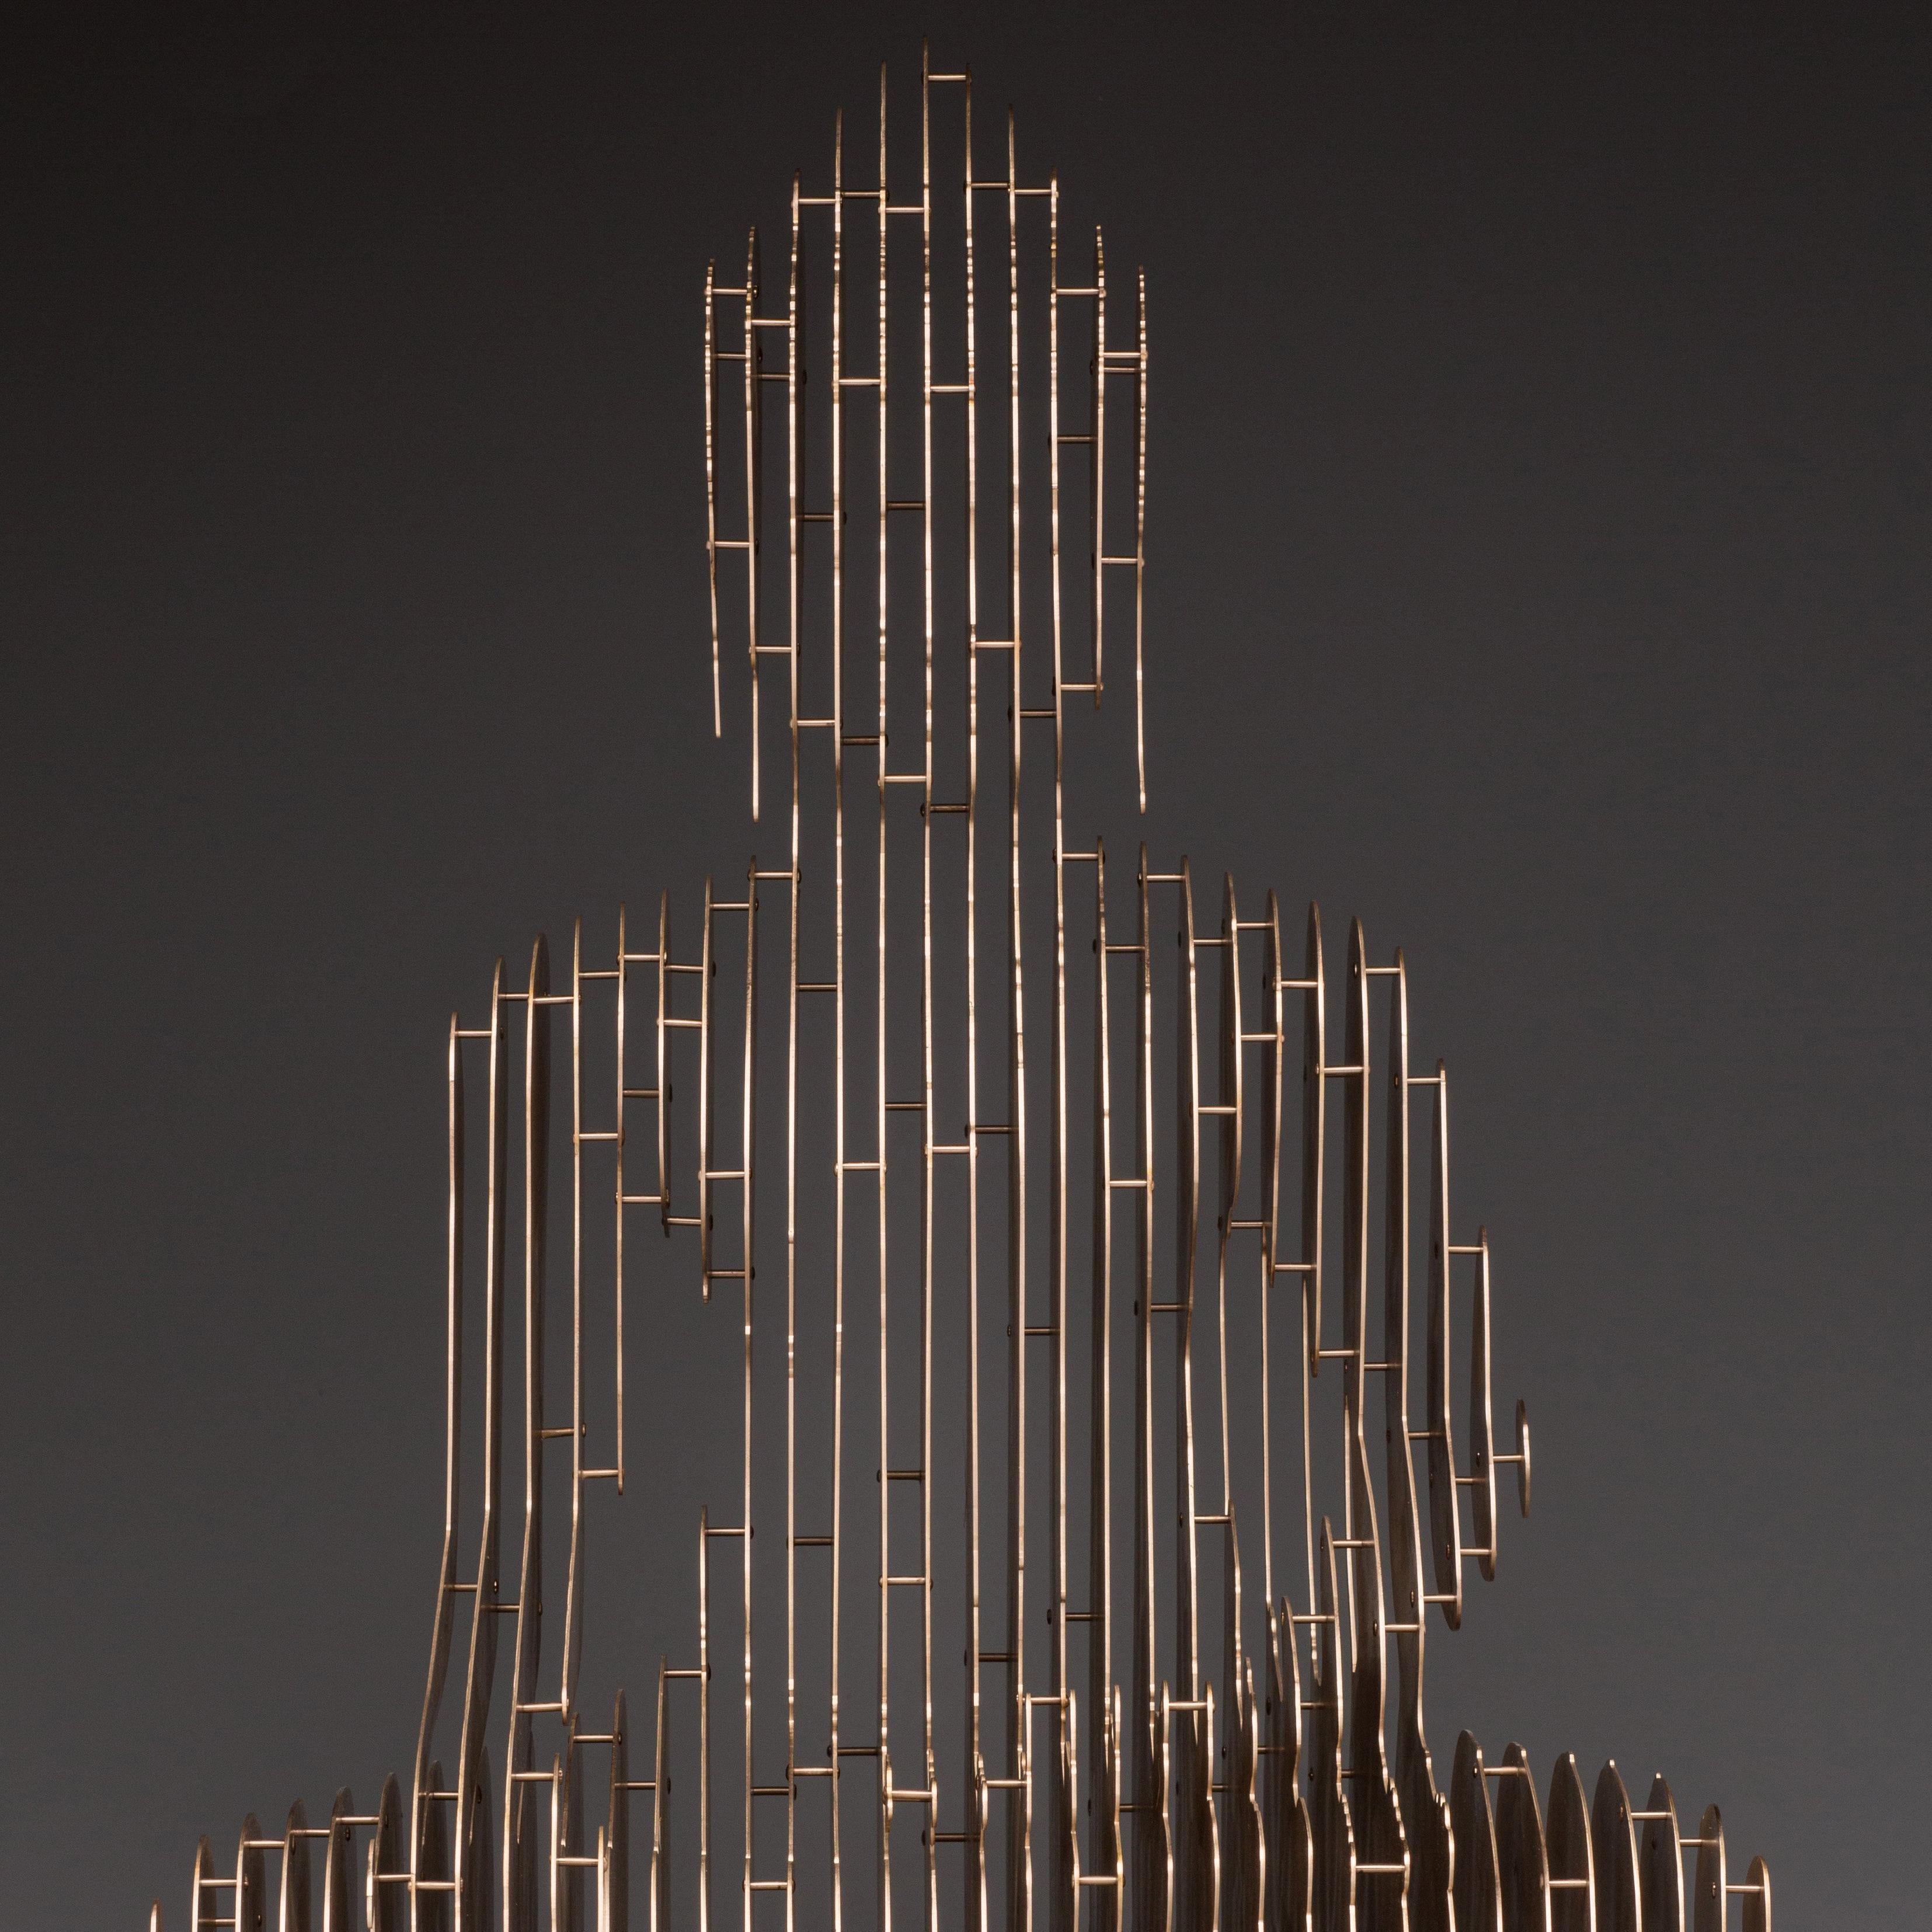 Limited edition of 6
Inspired by quantum physics, the artist’s professional background, Julian Voss-Andreae developed an approach that transforms the human figure into a large number of vertically arranged, parallel steel slices with constant